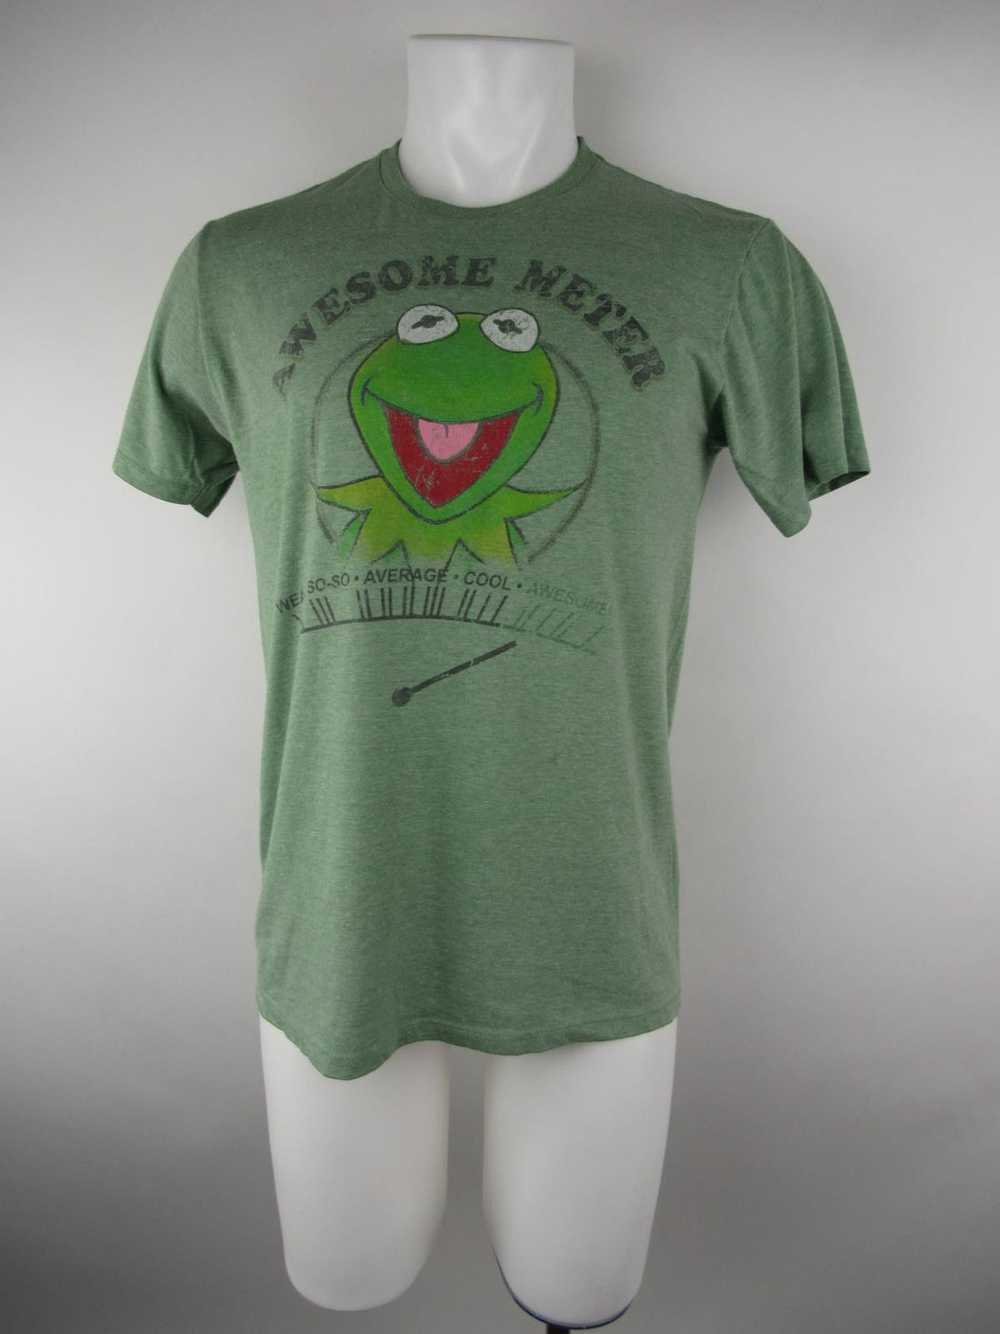 The Muppets Graphic Tee Shirt - image 1